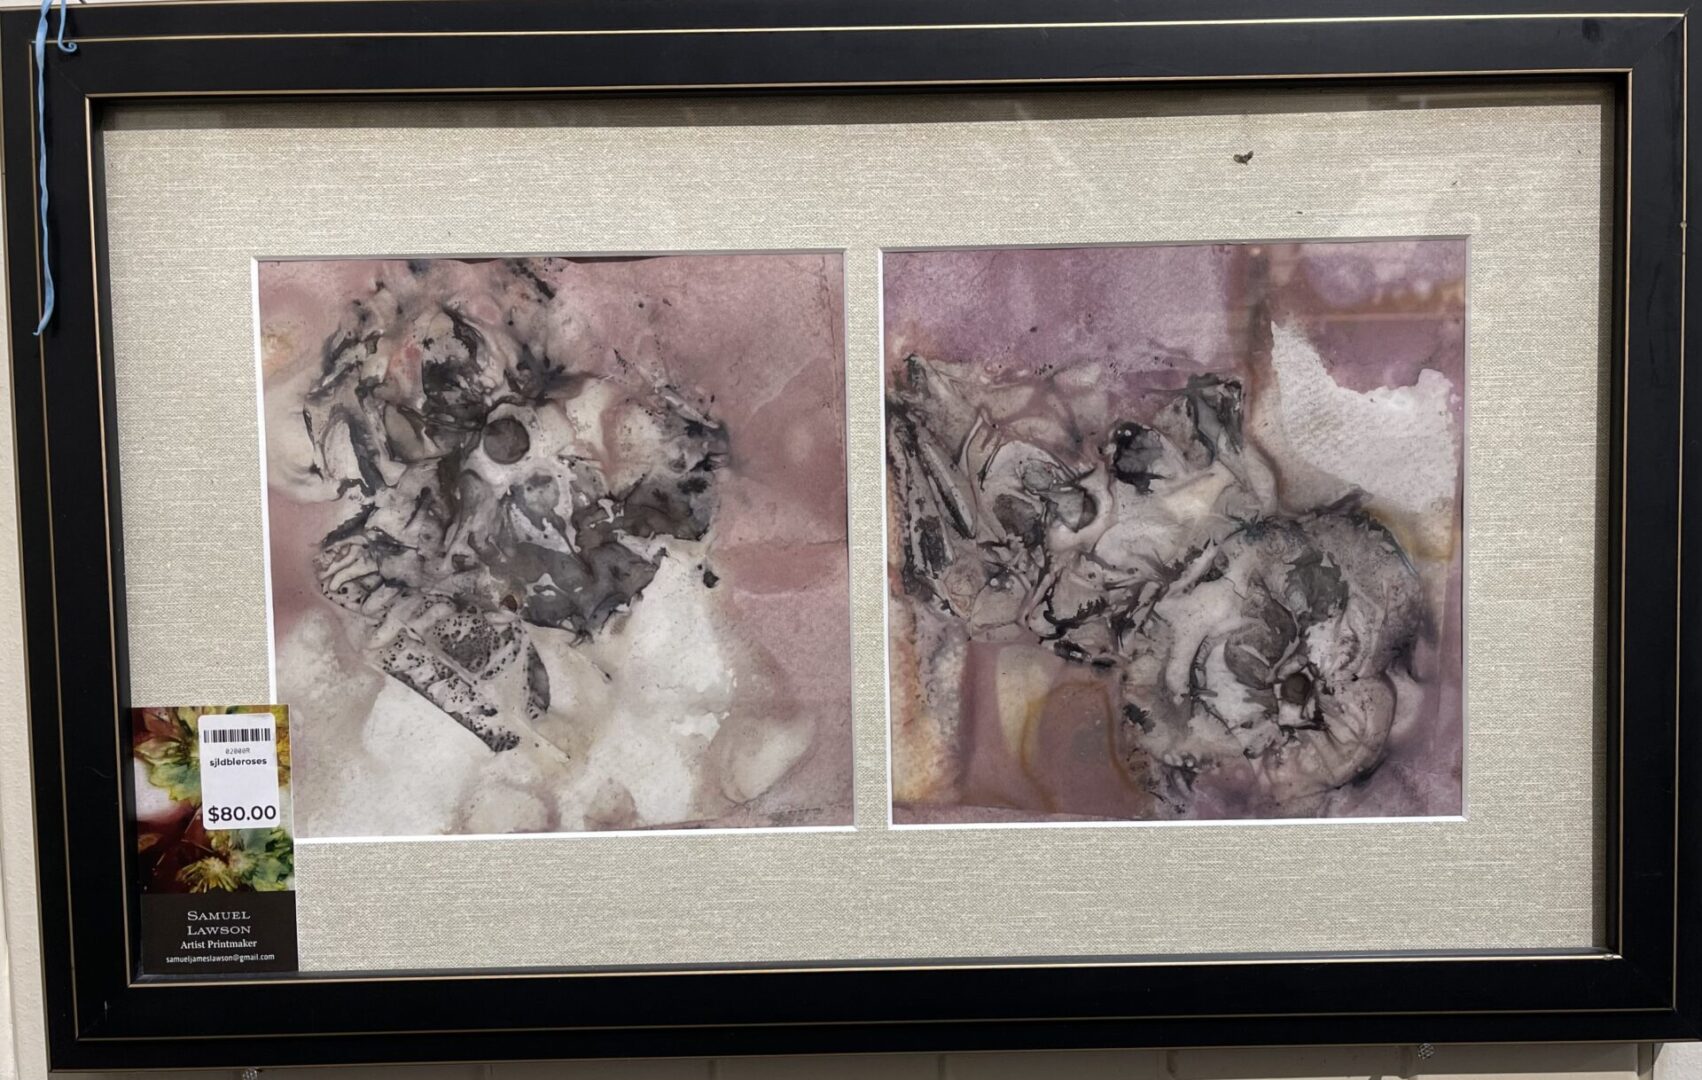 Two framed pieces of art on display in a store.